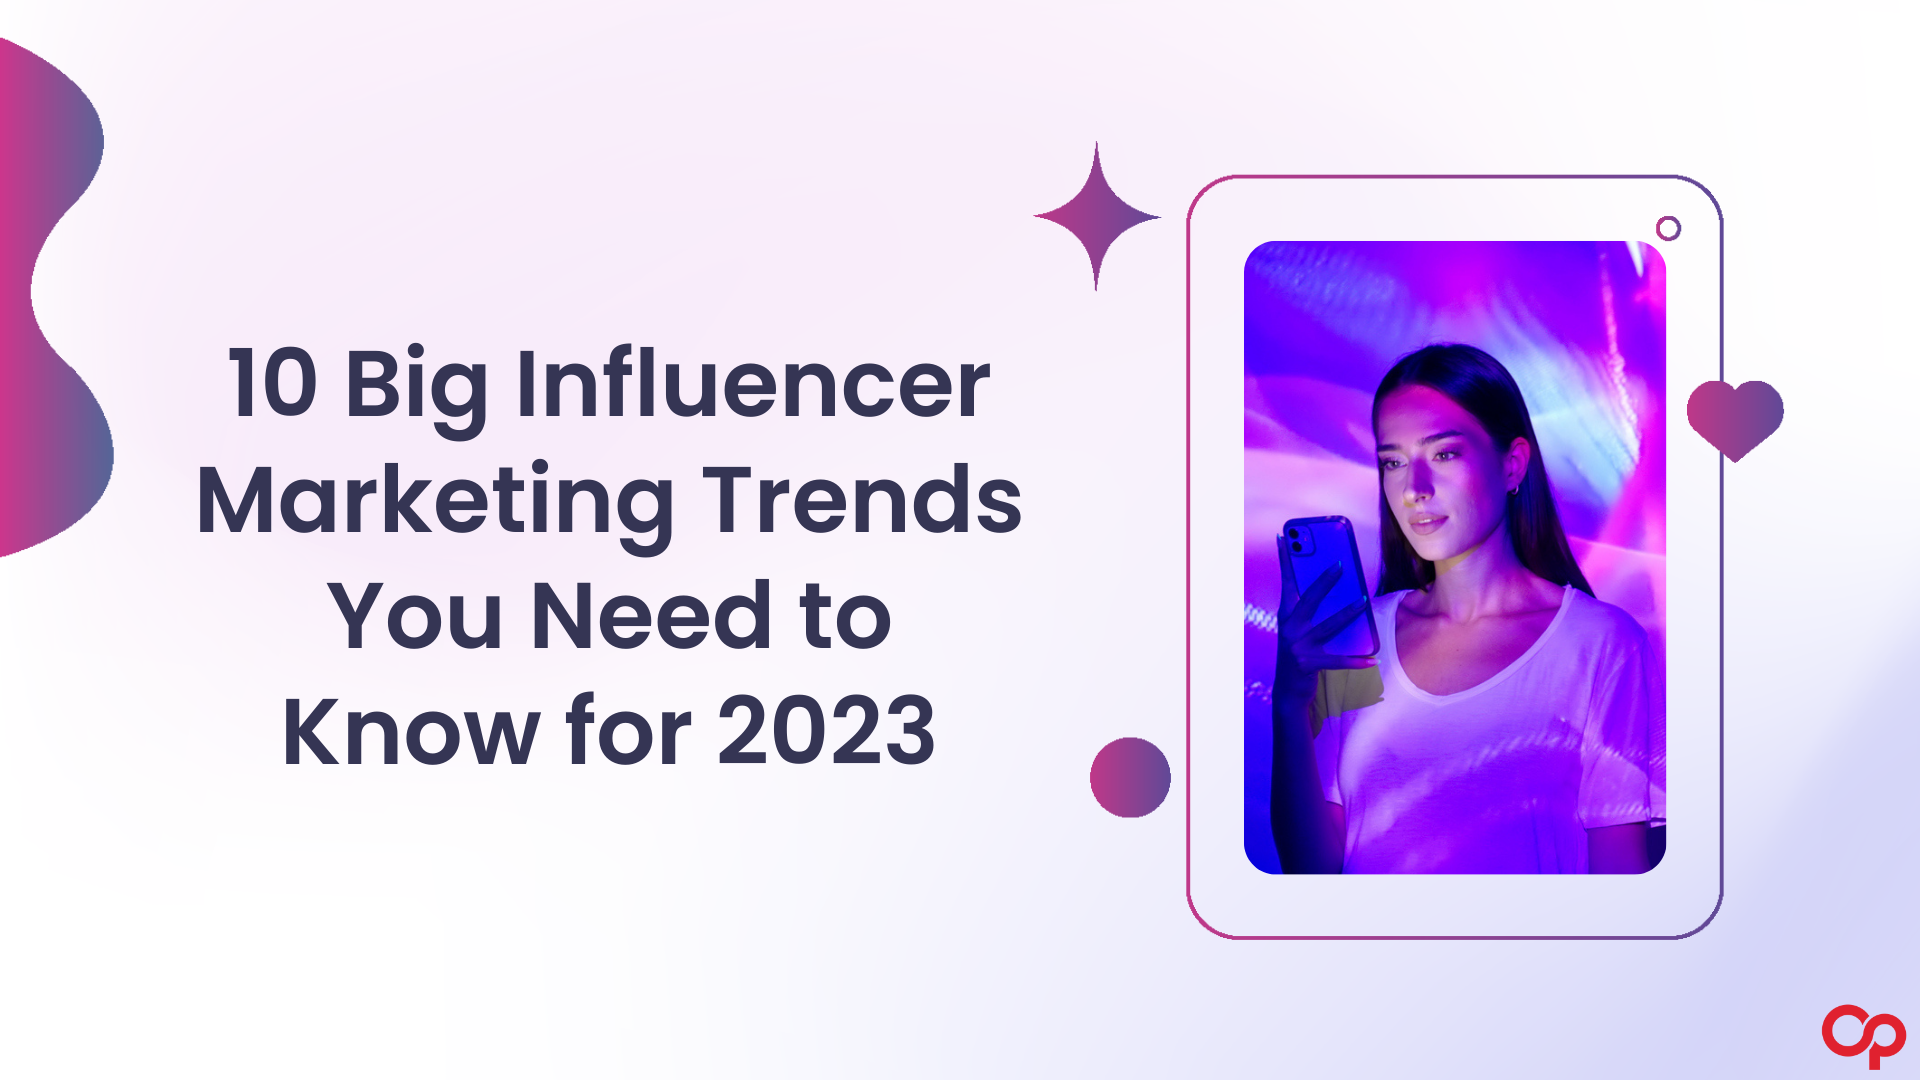 10 Big Influencer Marketing Trends You Need to Know for 2023